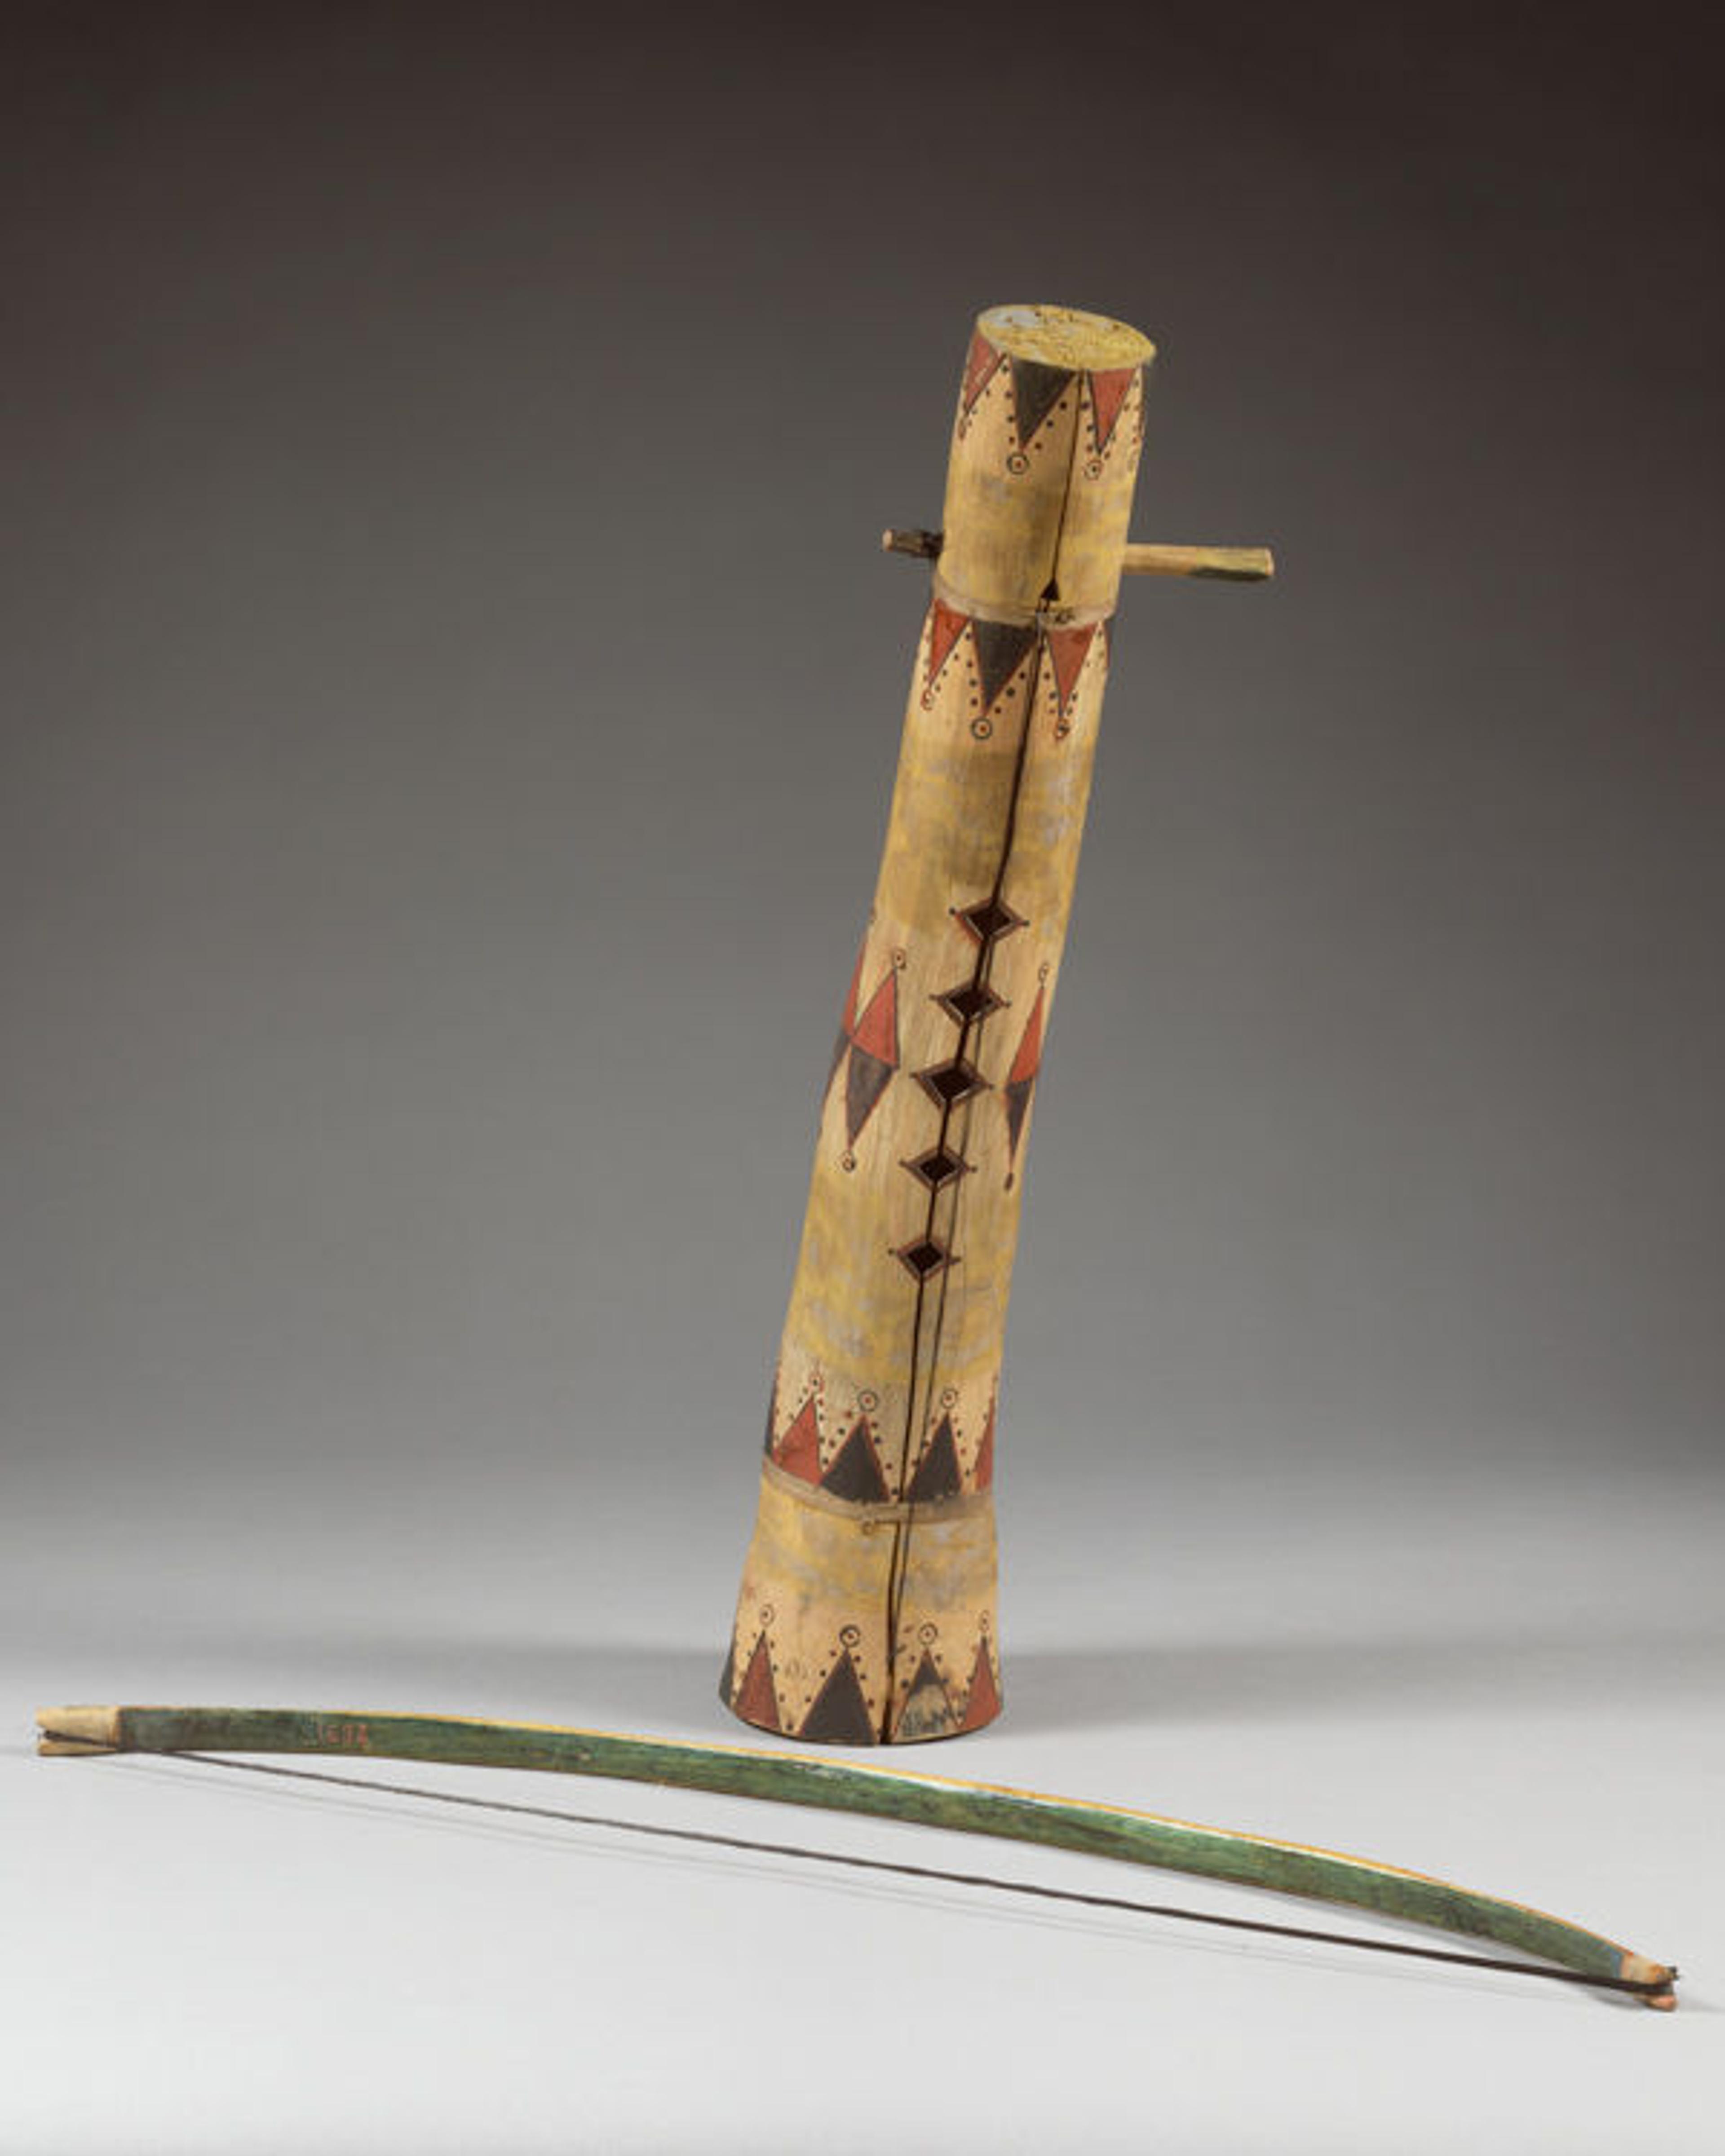 Tsii'edo'a'tl, 19th century | Arizona, United States. Native American (Apache) | The Metropolitan Museum of Art, New York, The Crosby Brown Collection of Musical Instruments, 1889 (89.4.2631 a, b)